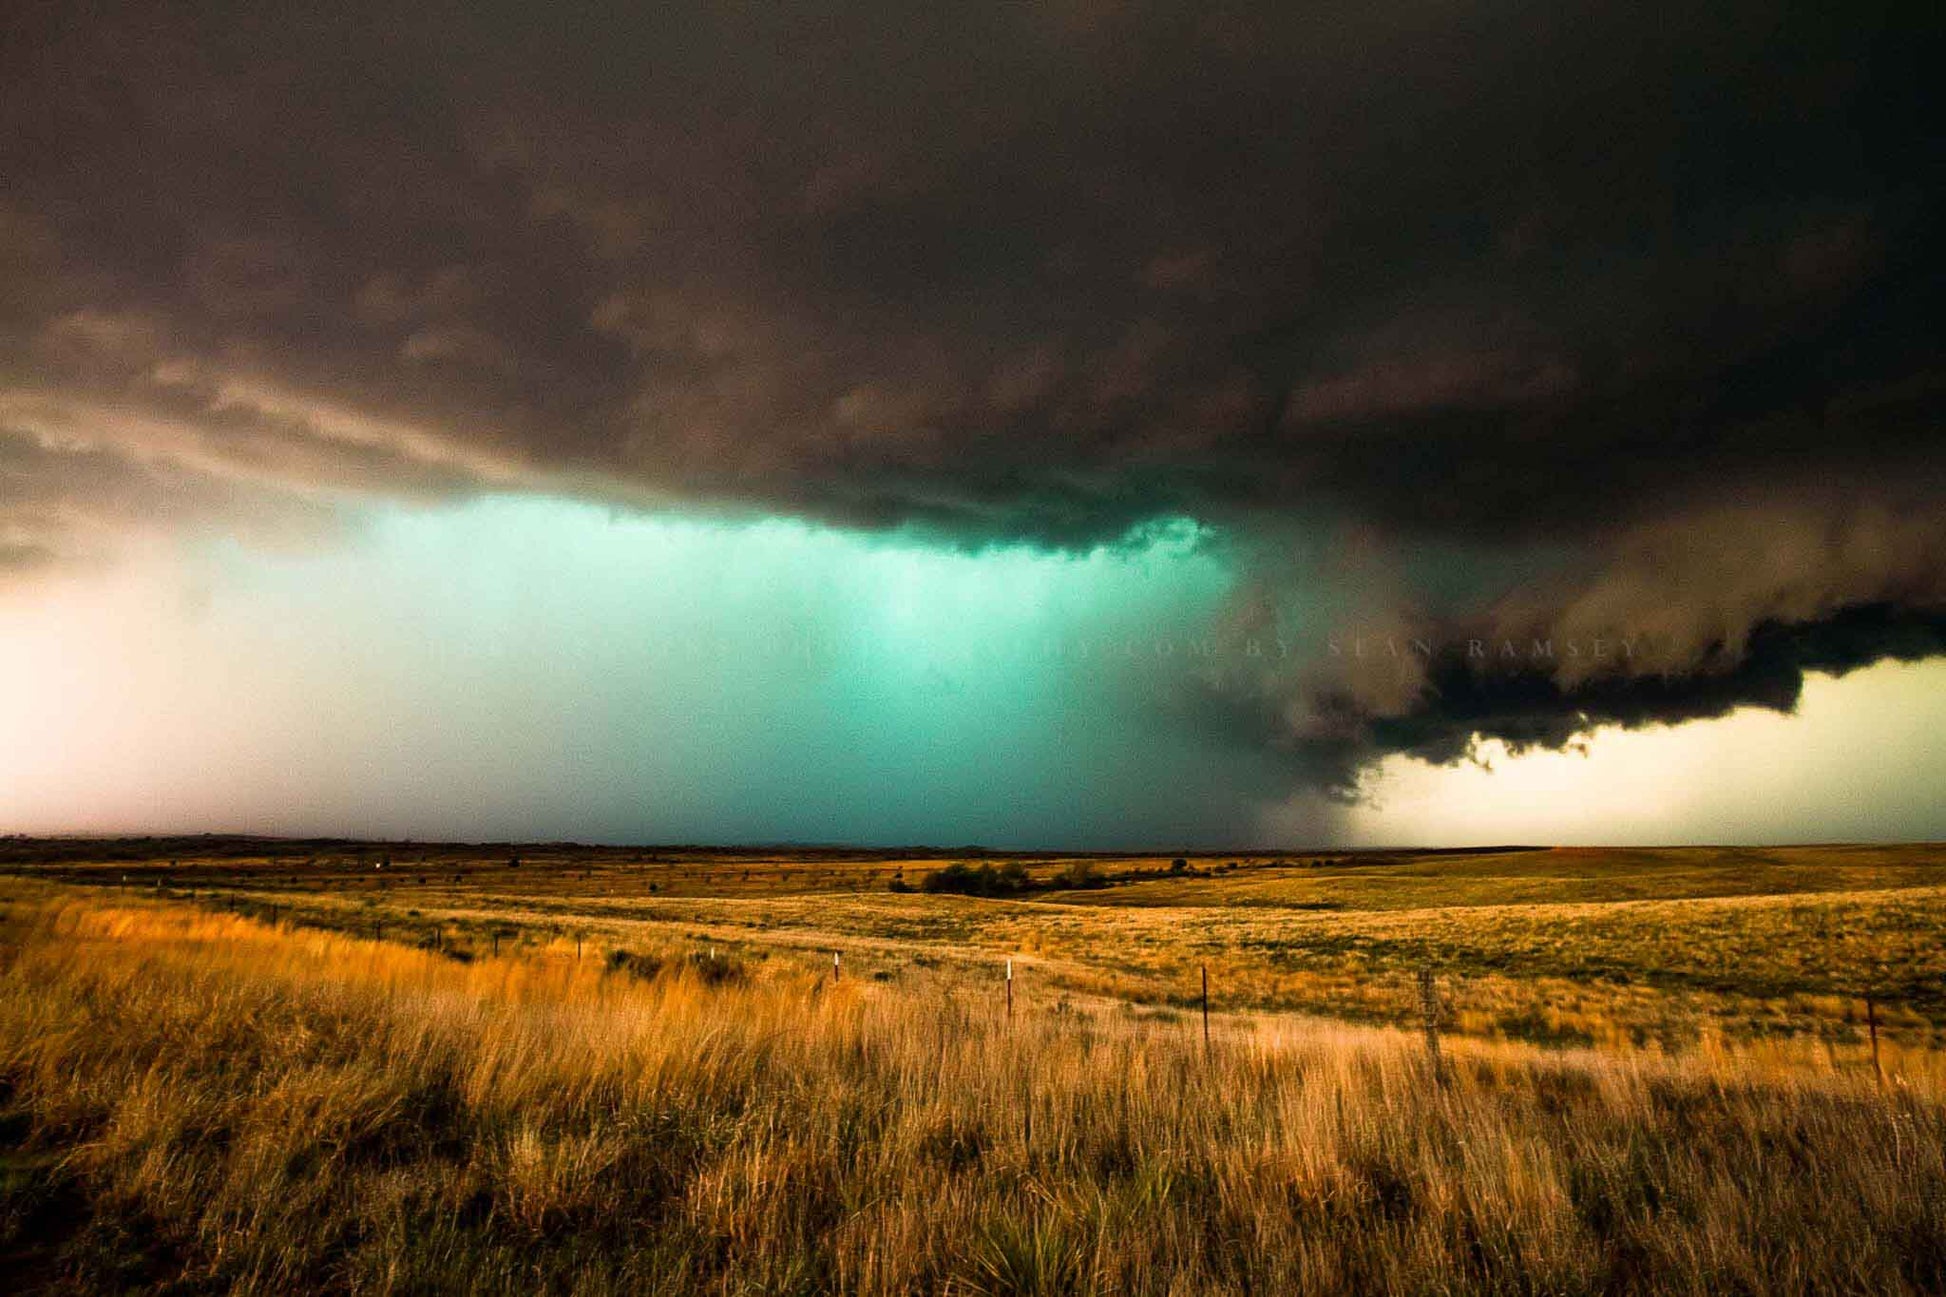 Storm photography print of a supercell thunderstorm with a teal hail core on a stormy spring day on the plains of the Texas panhandle by Sean Ramsey of Southern Plains Photography.